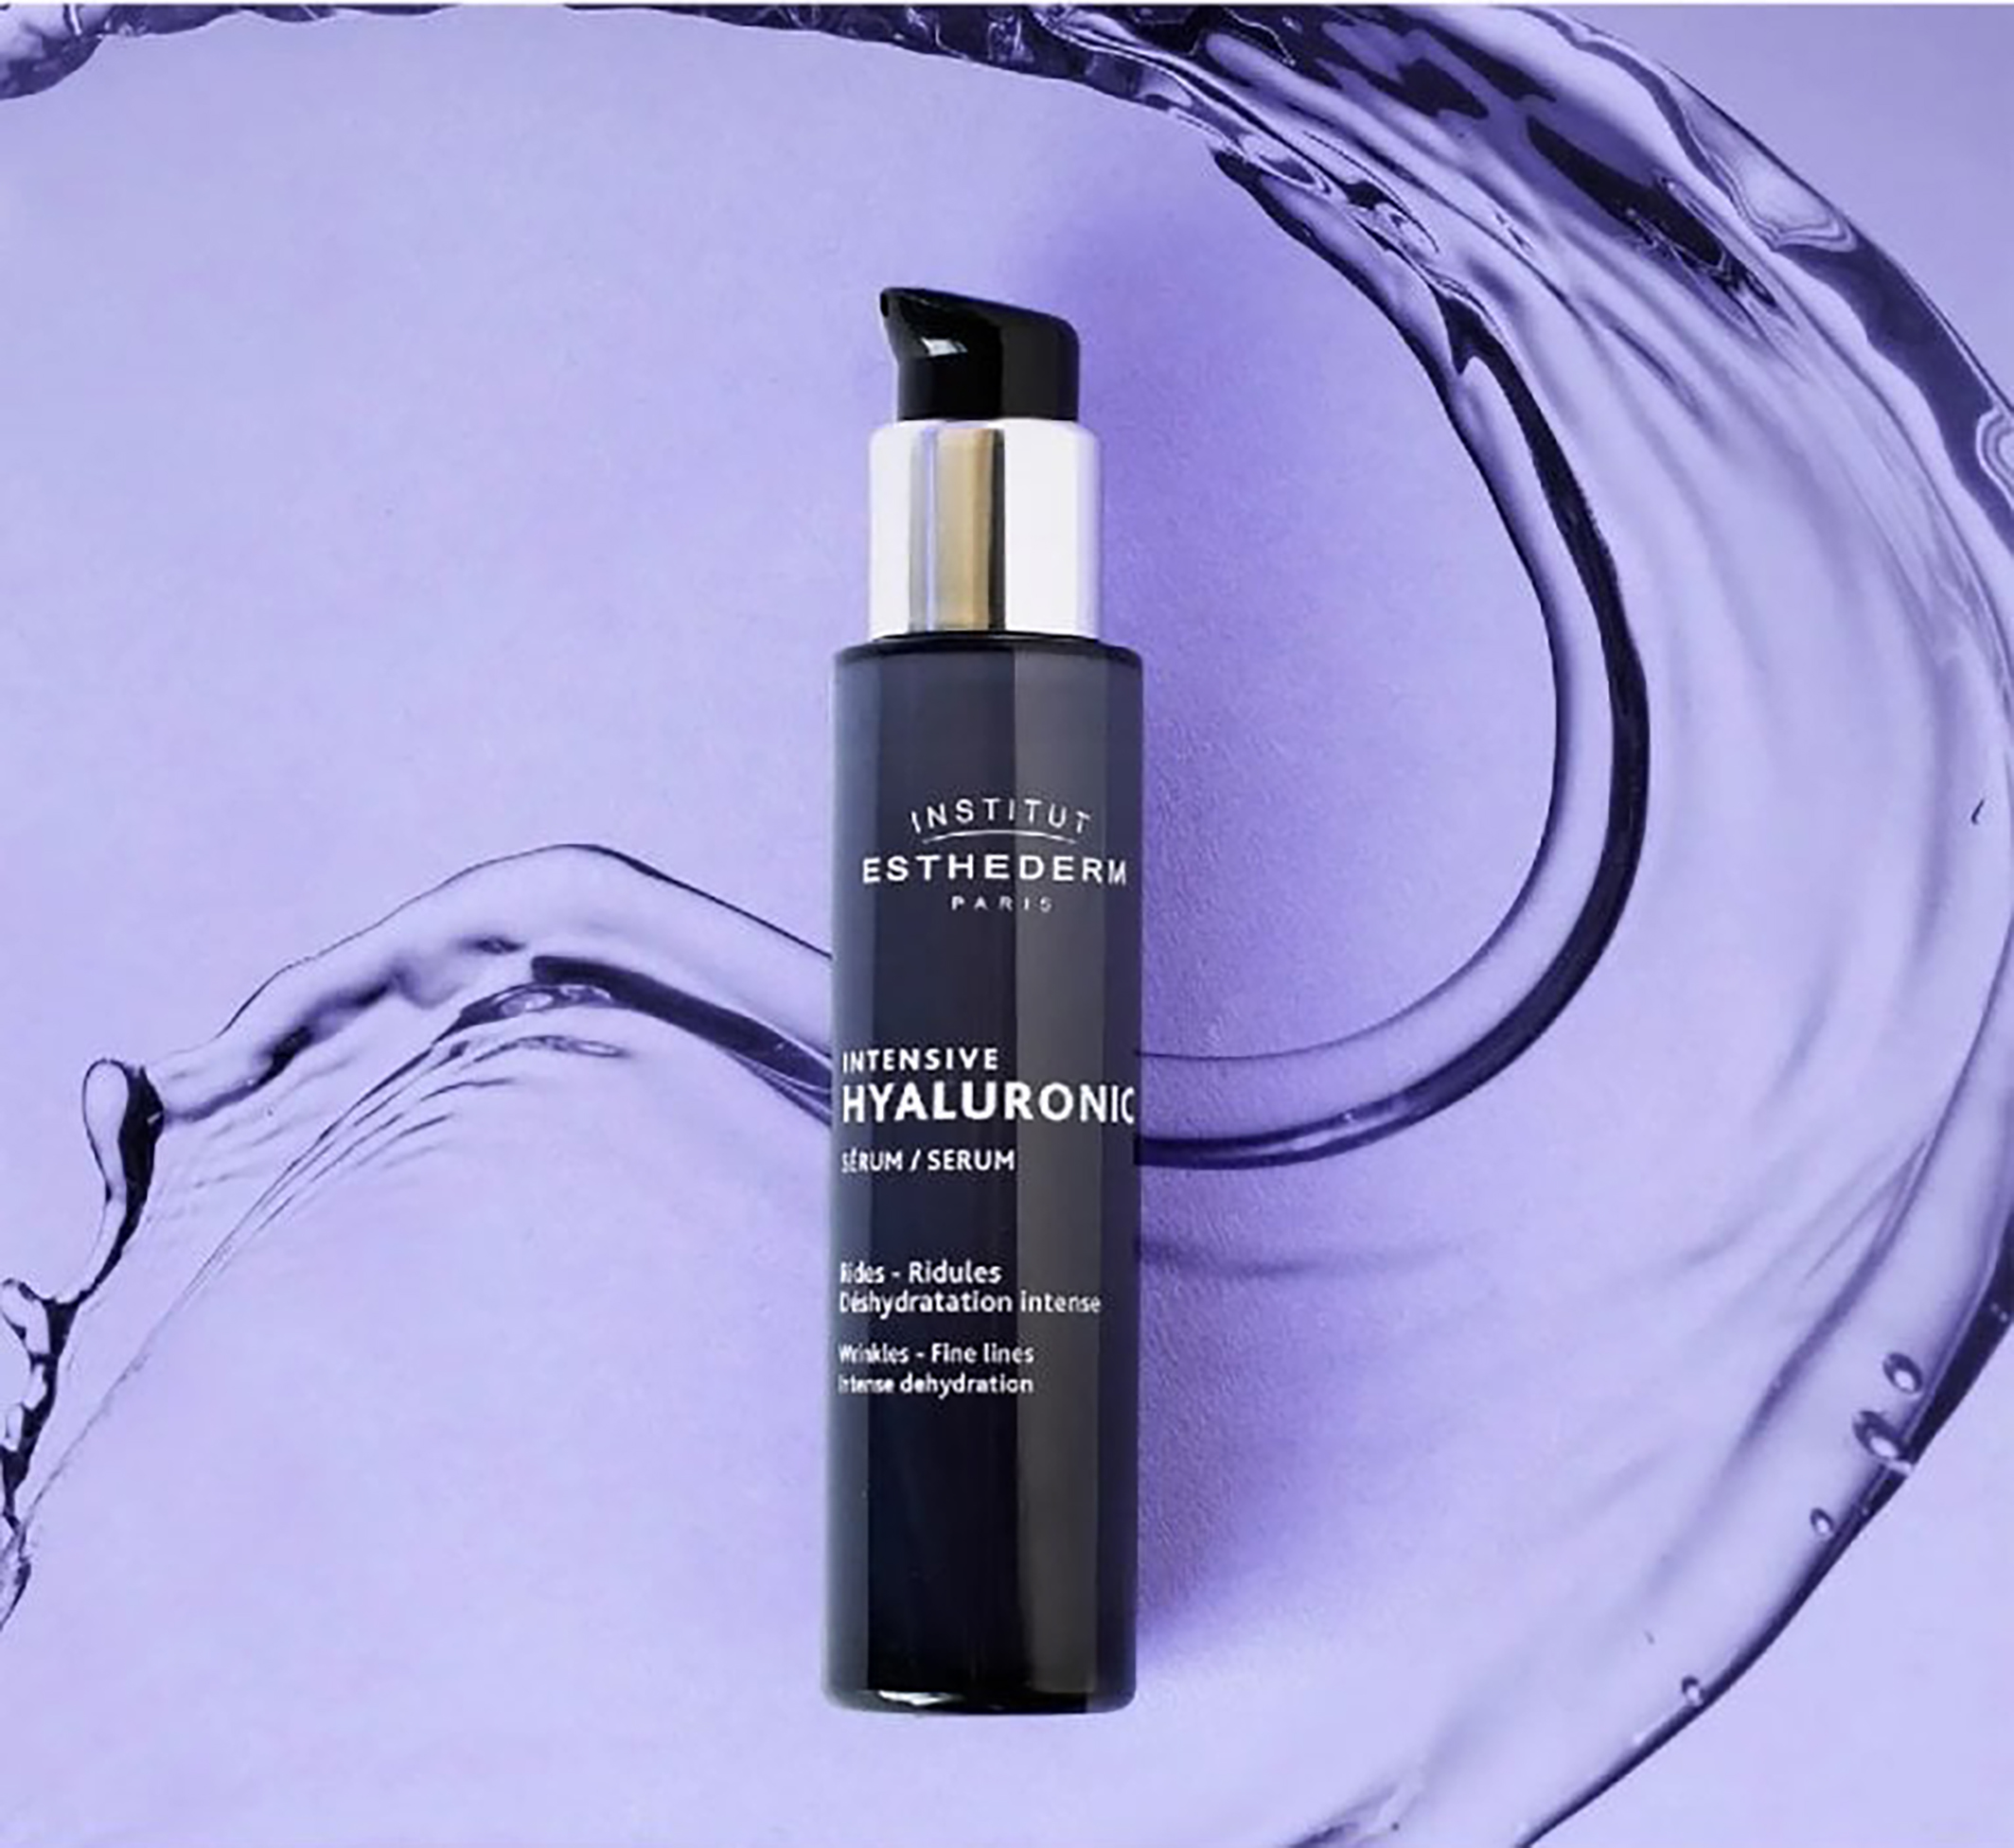 INTENSIVE HYALURONIC